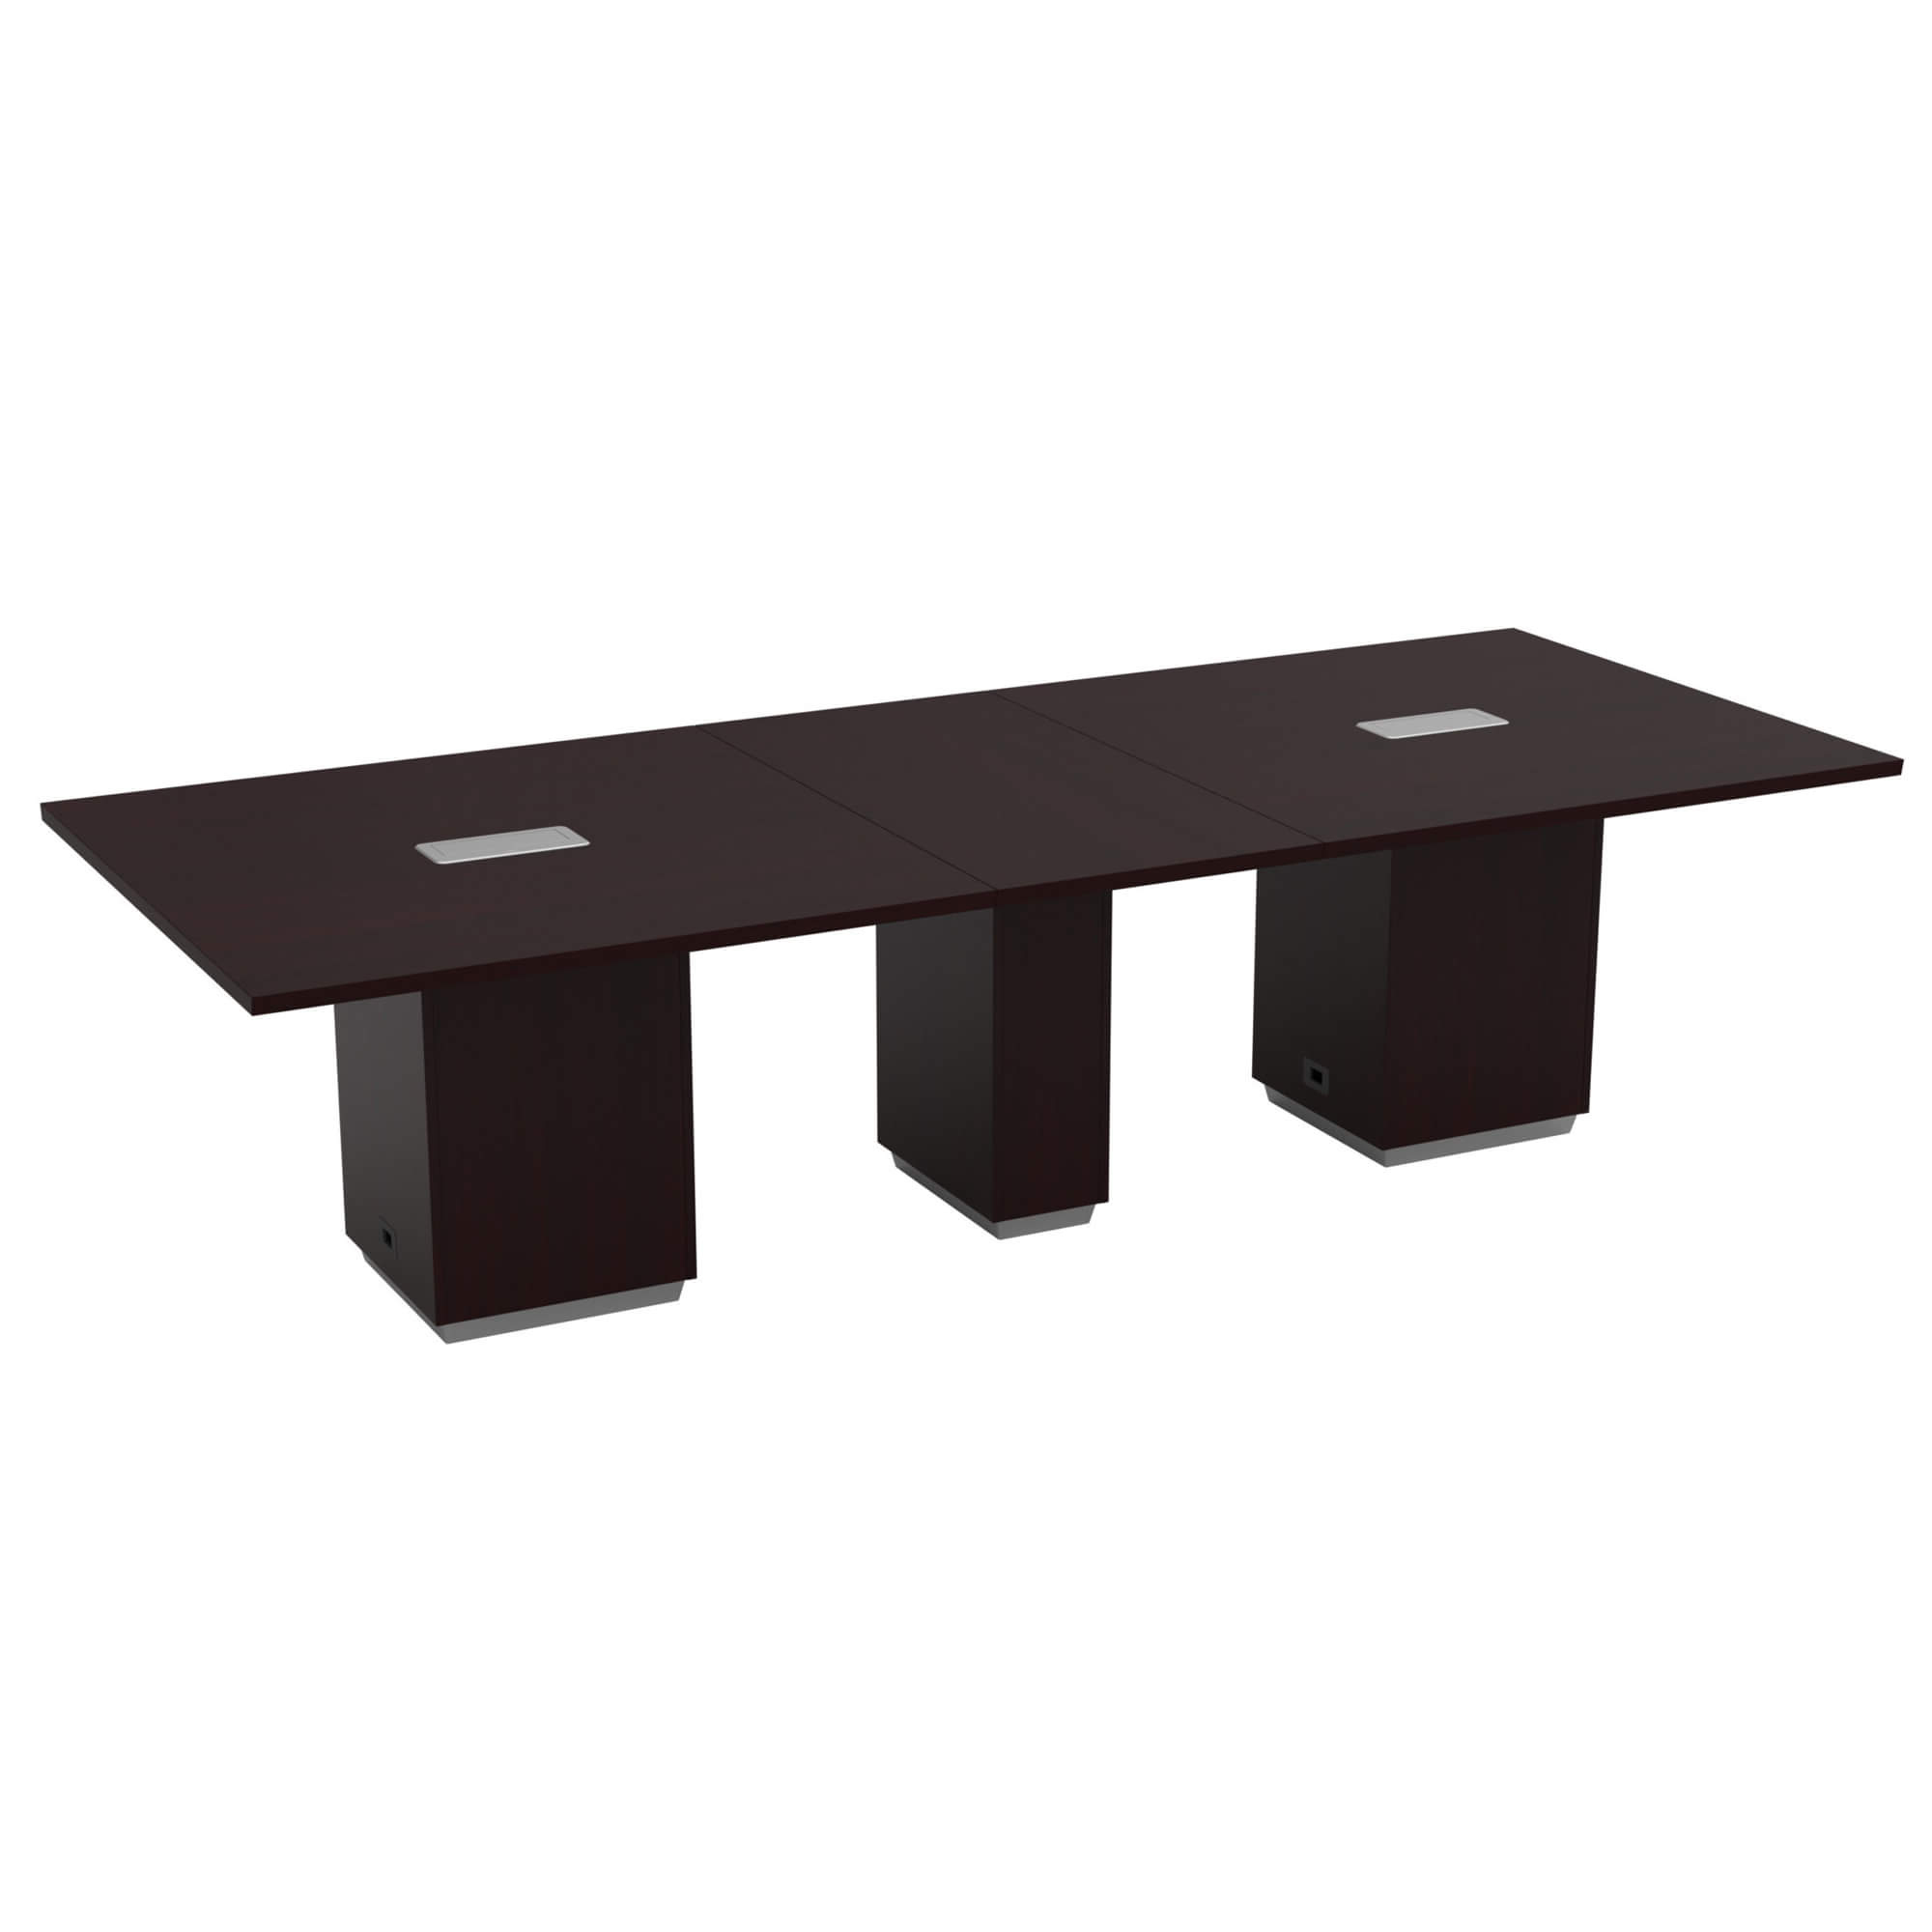 Conference tables CUB TUXDKR 61 PSO 1